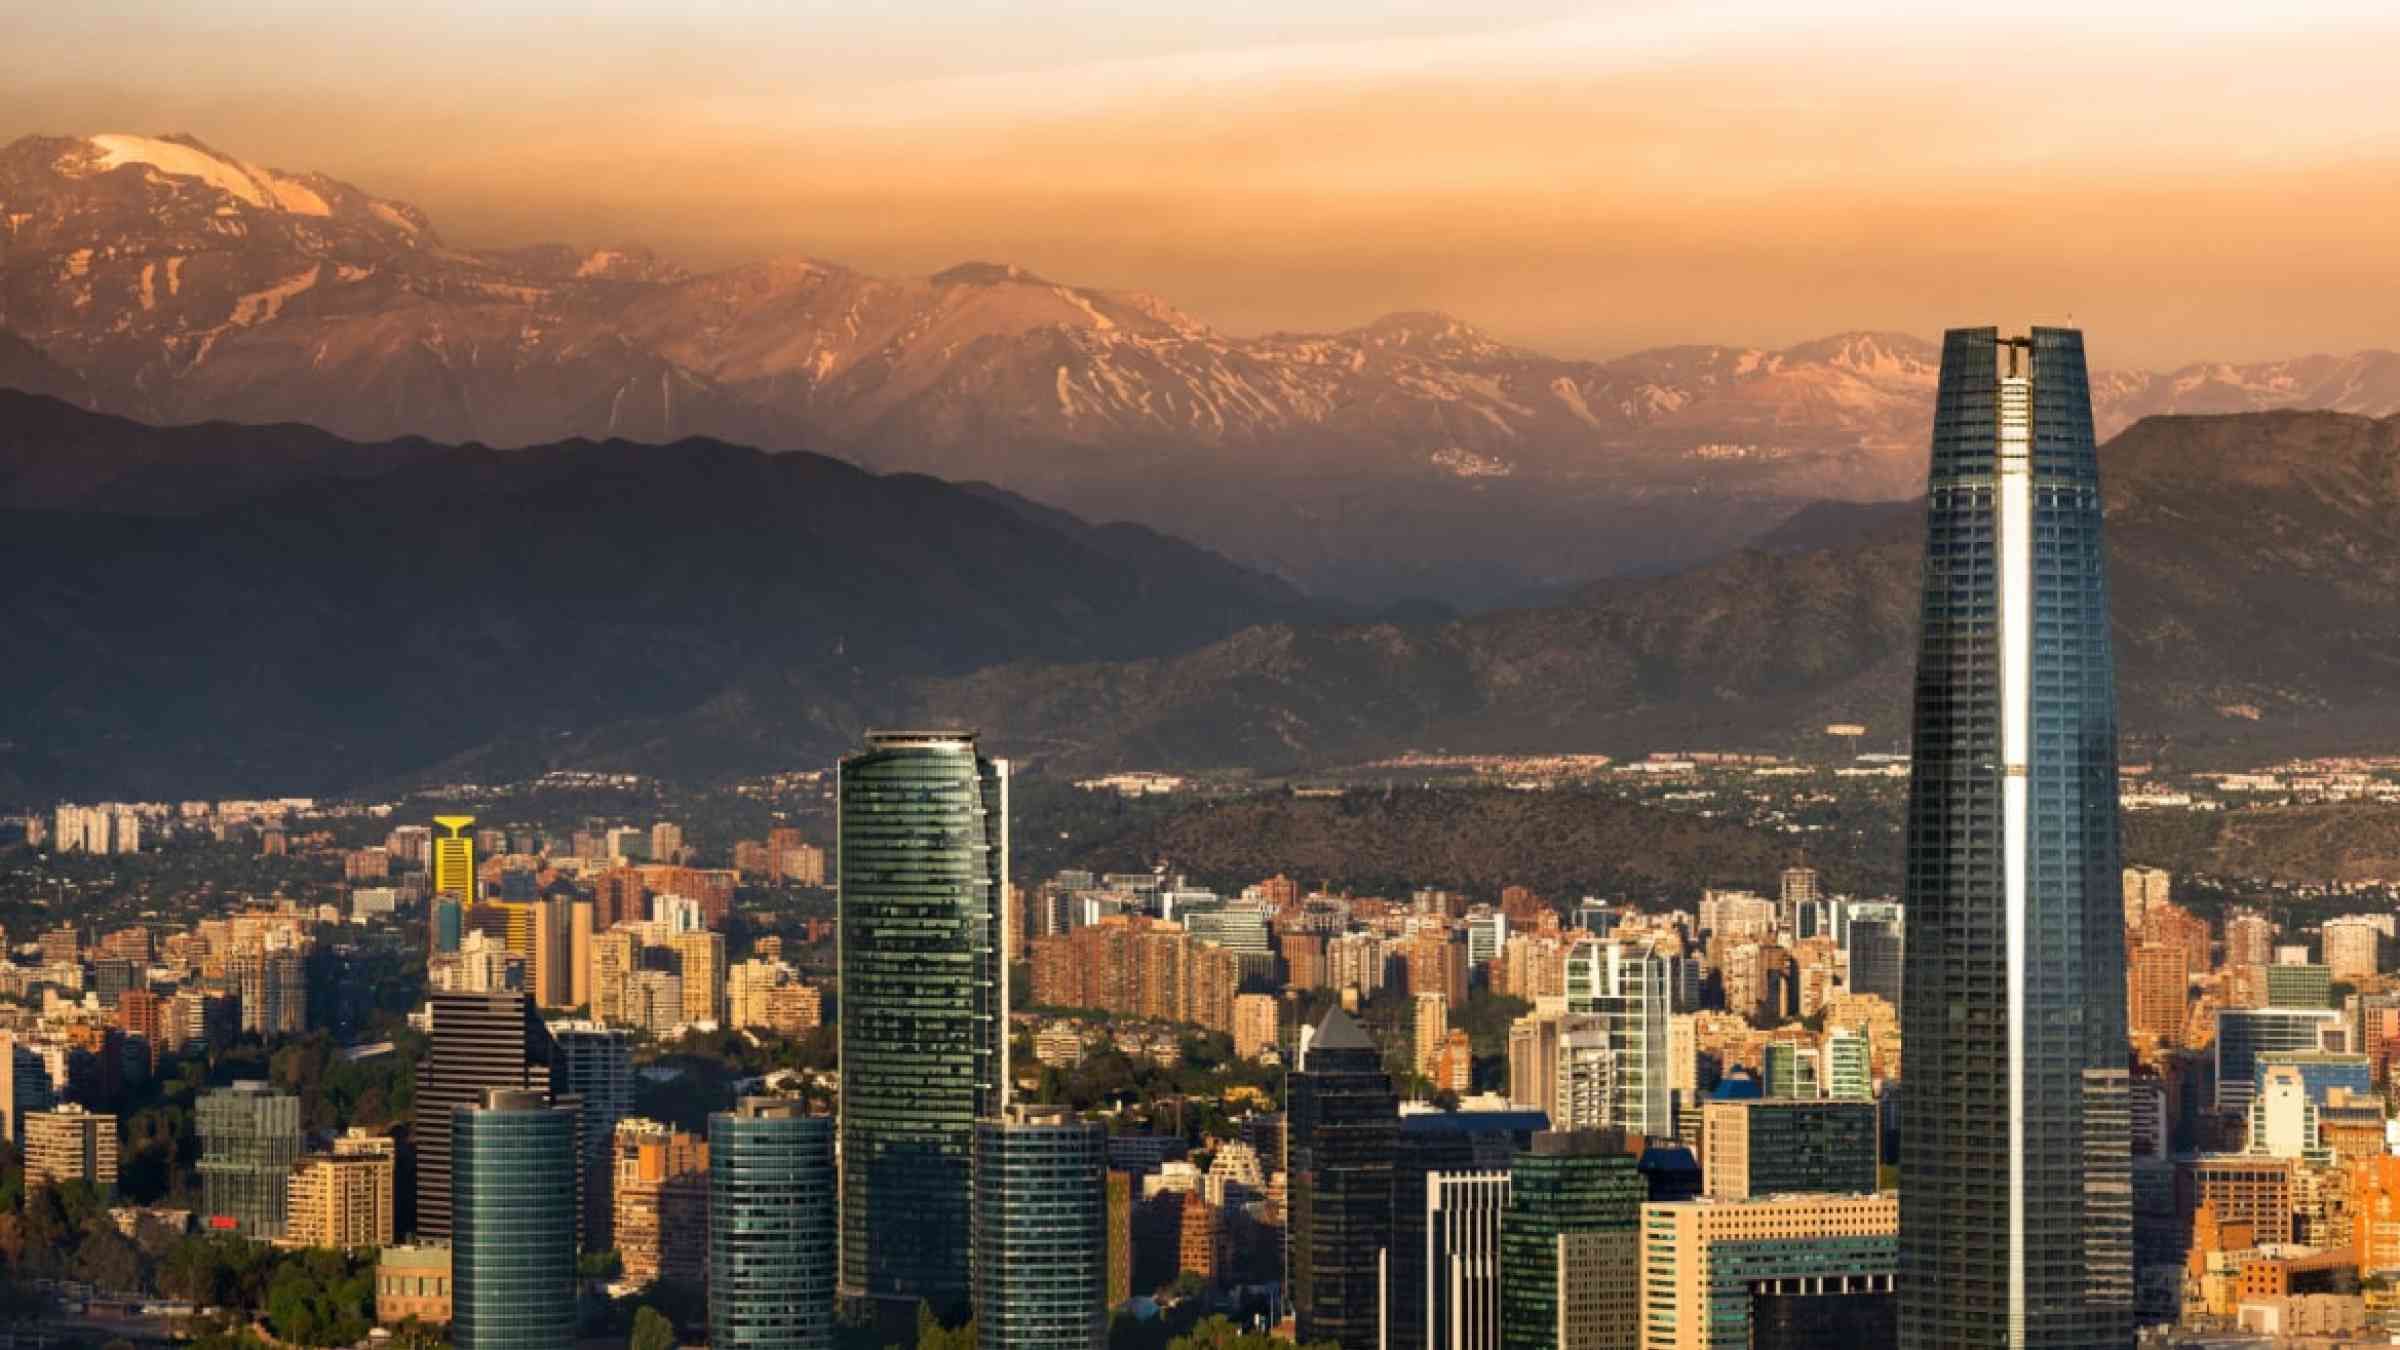 Skyline of Santiago de Chile during sunrise. View of the city and the mountains in the background.